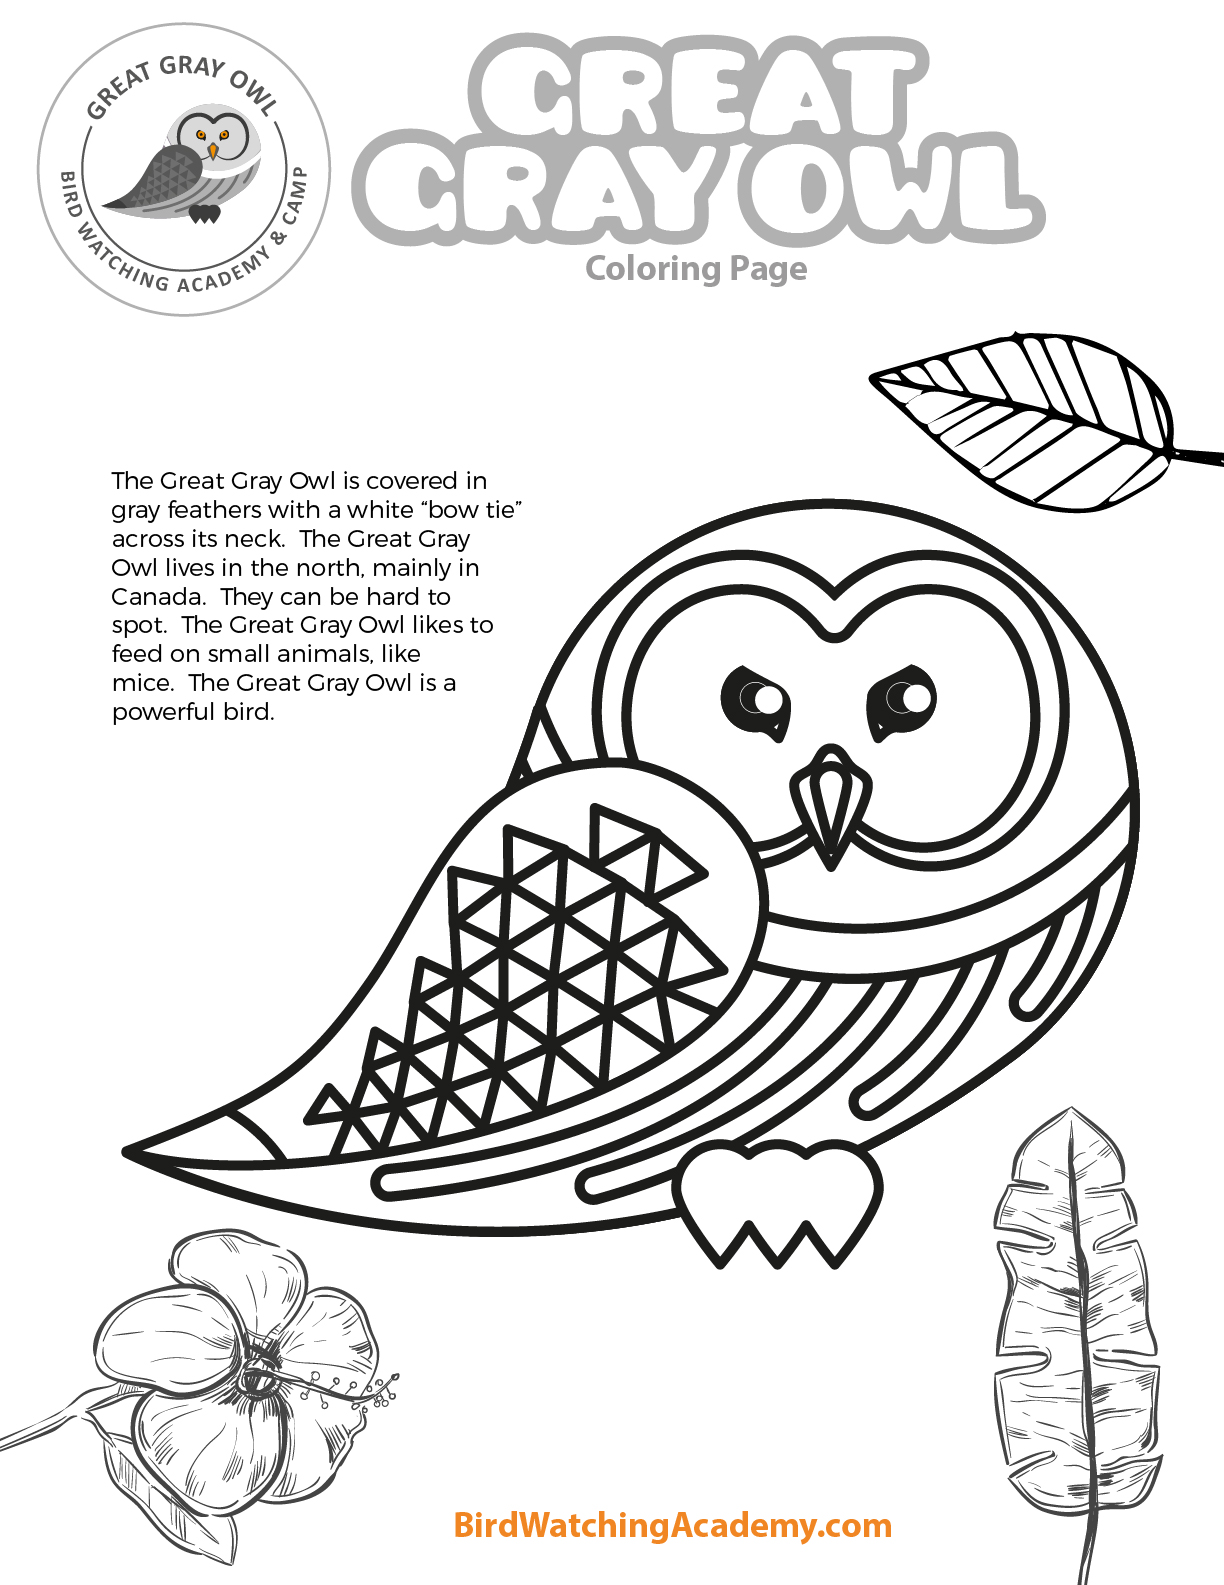 Great gray owl coloring page